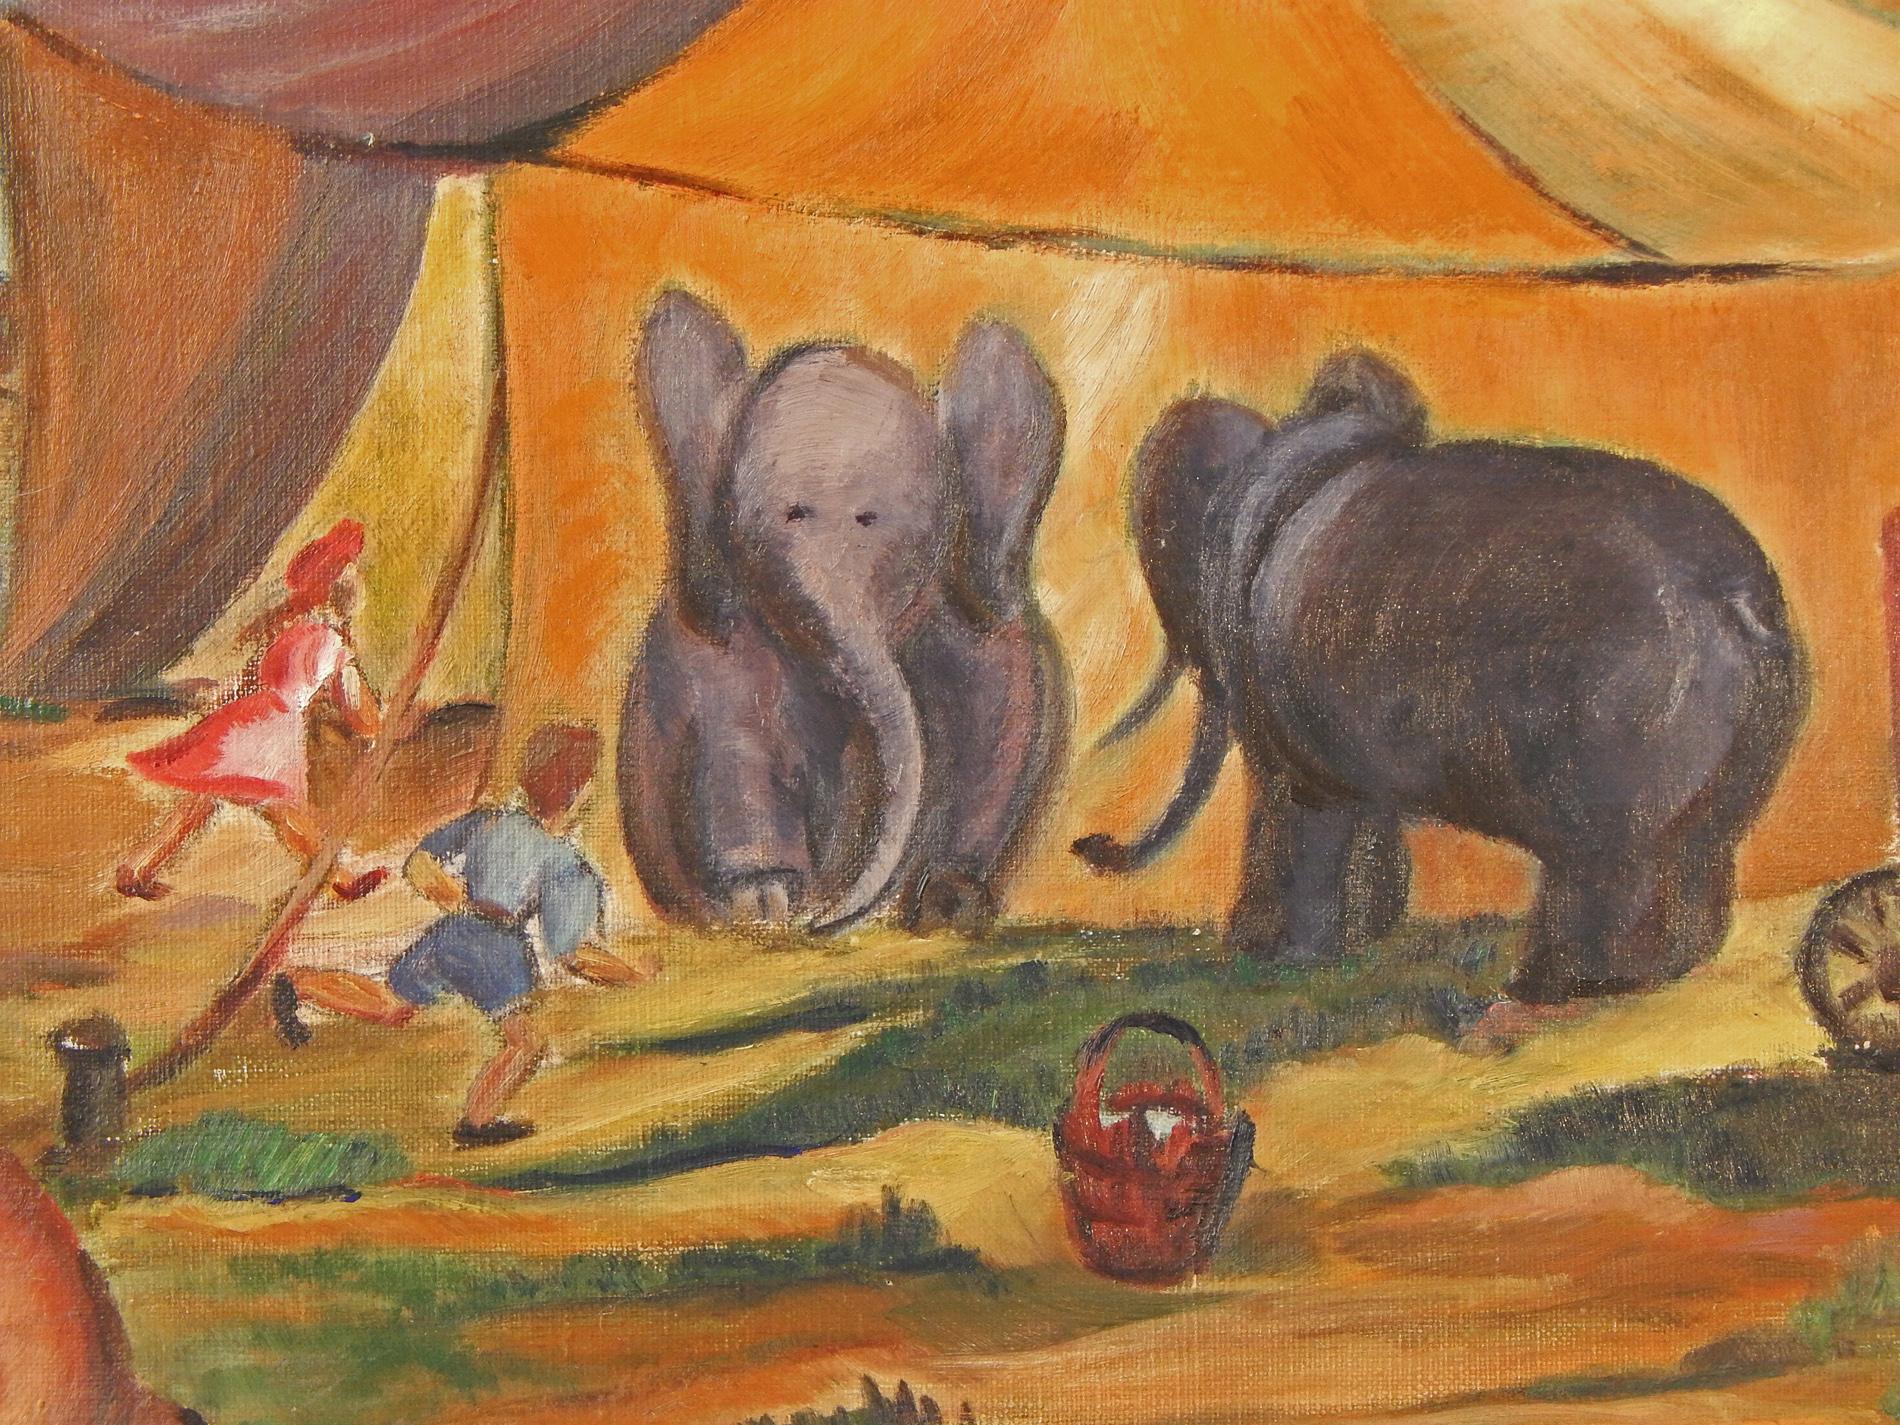 Exuberant and vividly painted, this painting depicts the circus big top on the edge of a small town, with a wagon to one side, a pair of elephants waiting for their moment, and two children rushing toward the action. The painting is by Anne Walker,